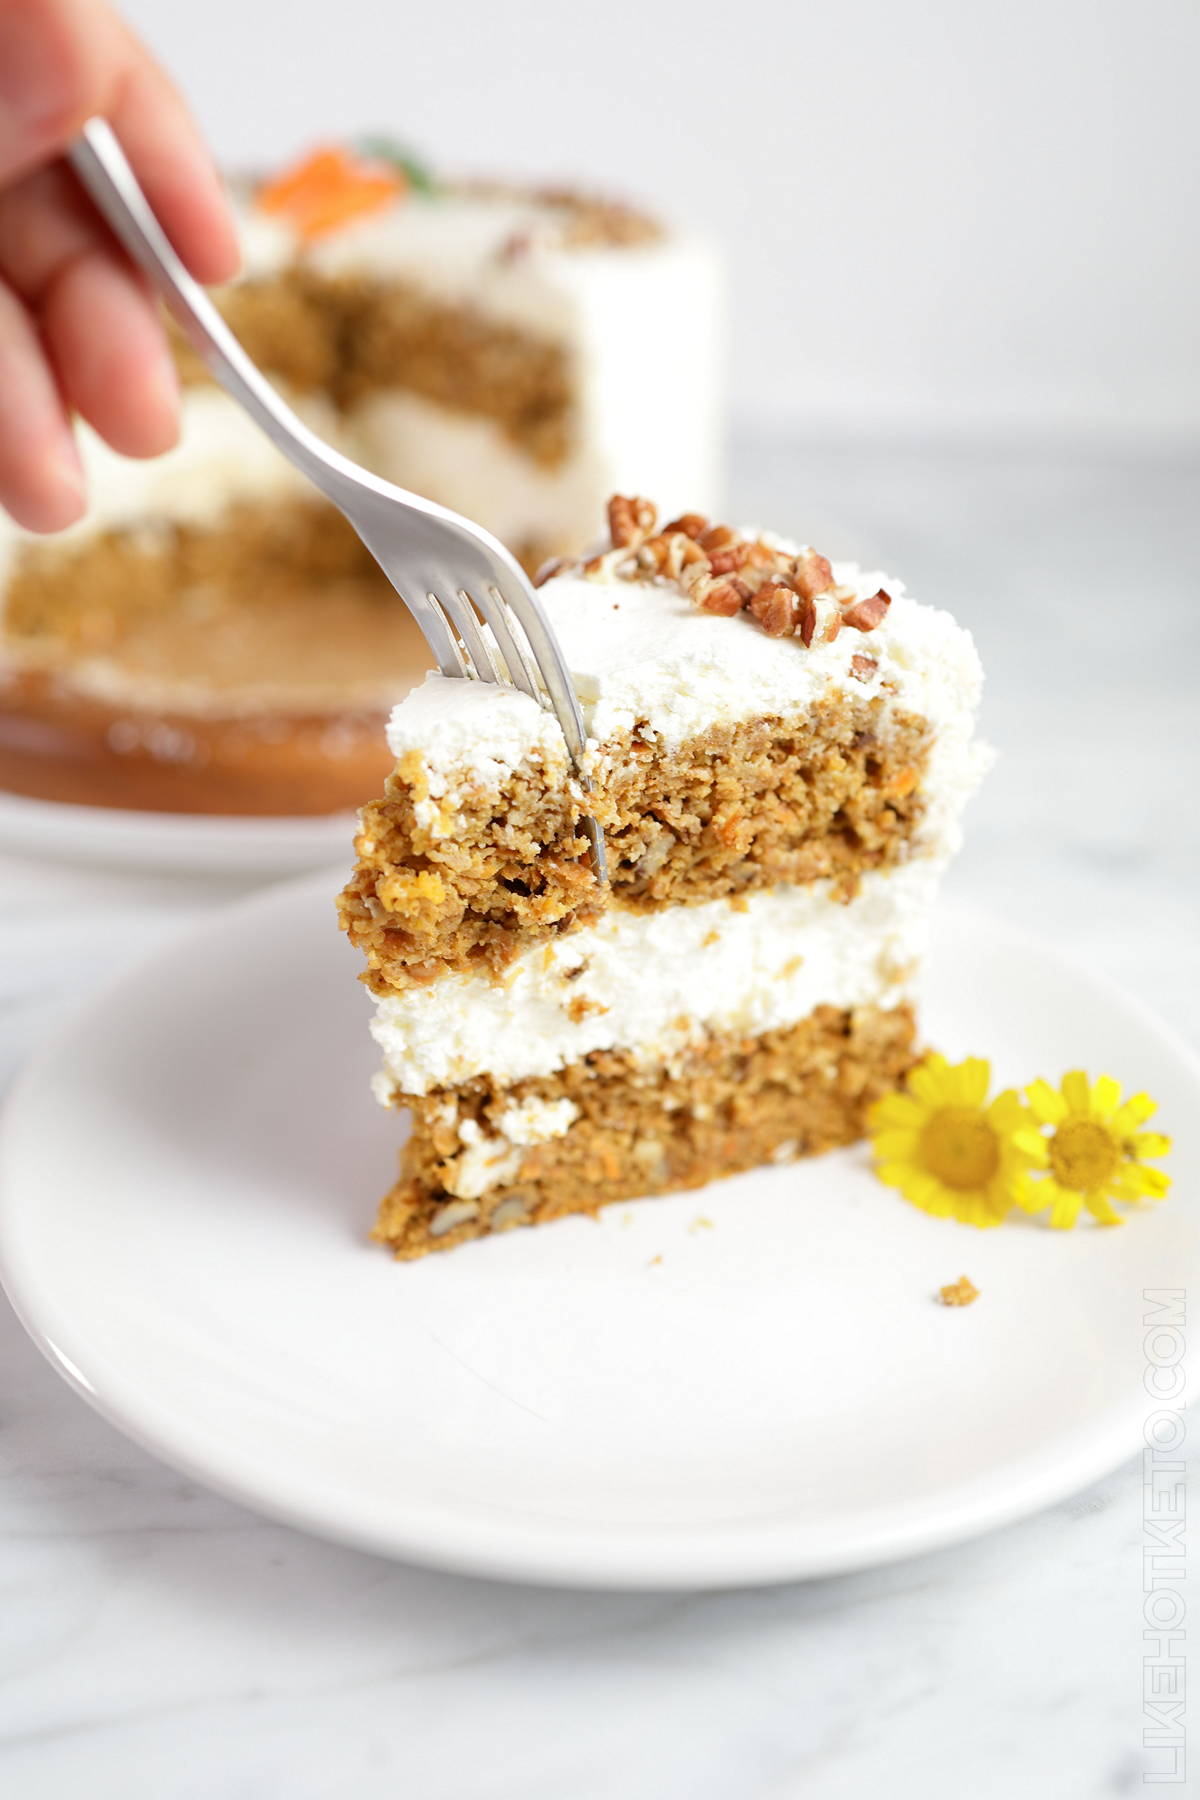 A fork cutting into a big slice of carrot cake with cream cheese frosting, on a white plate with yellow flowers.